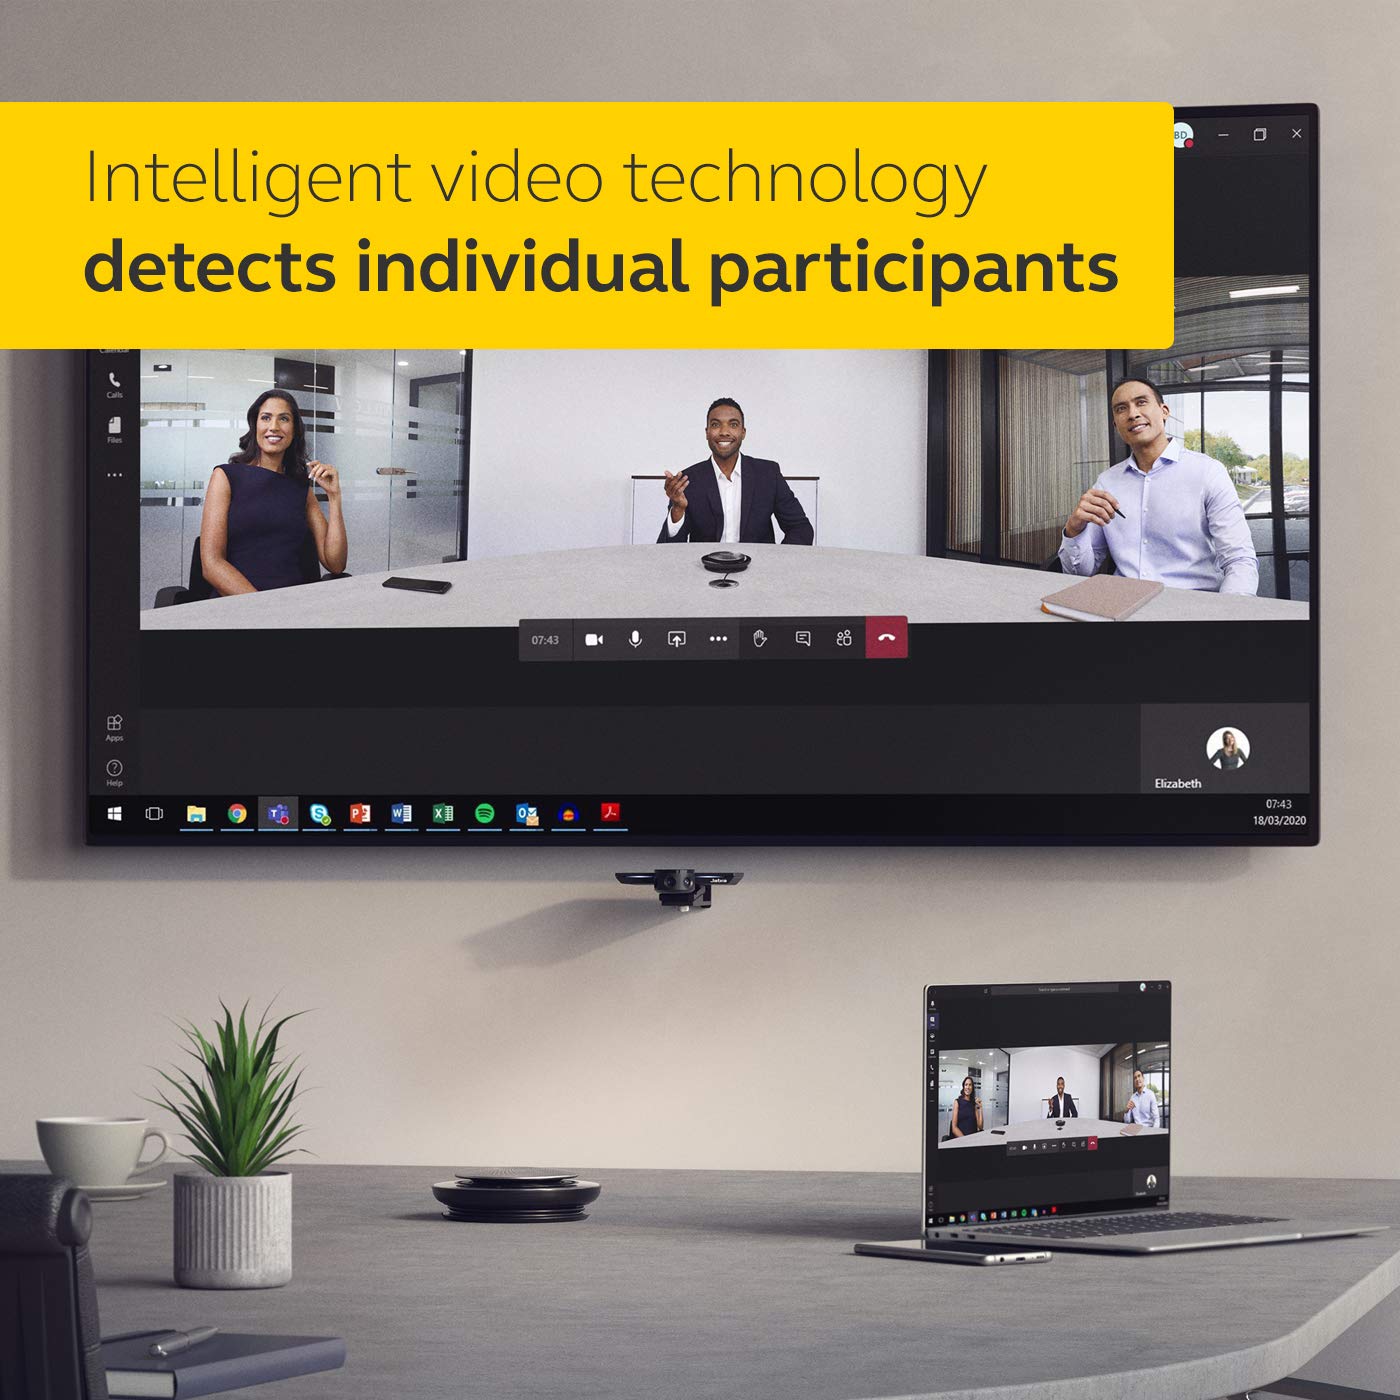 Jabra 8100-119 PanaCast Panoramic 4K Video Conferencing Camera – Flexible Plug-and-Play Meeting Room/Video Solution Camera with 180 Degree Field of View (Renewed)